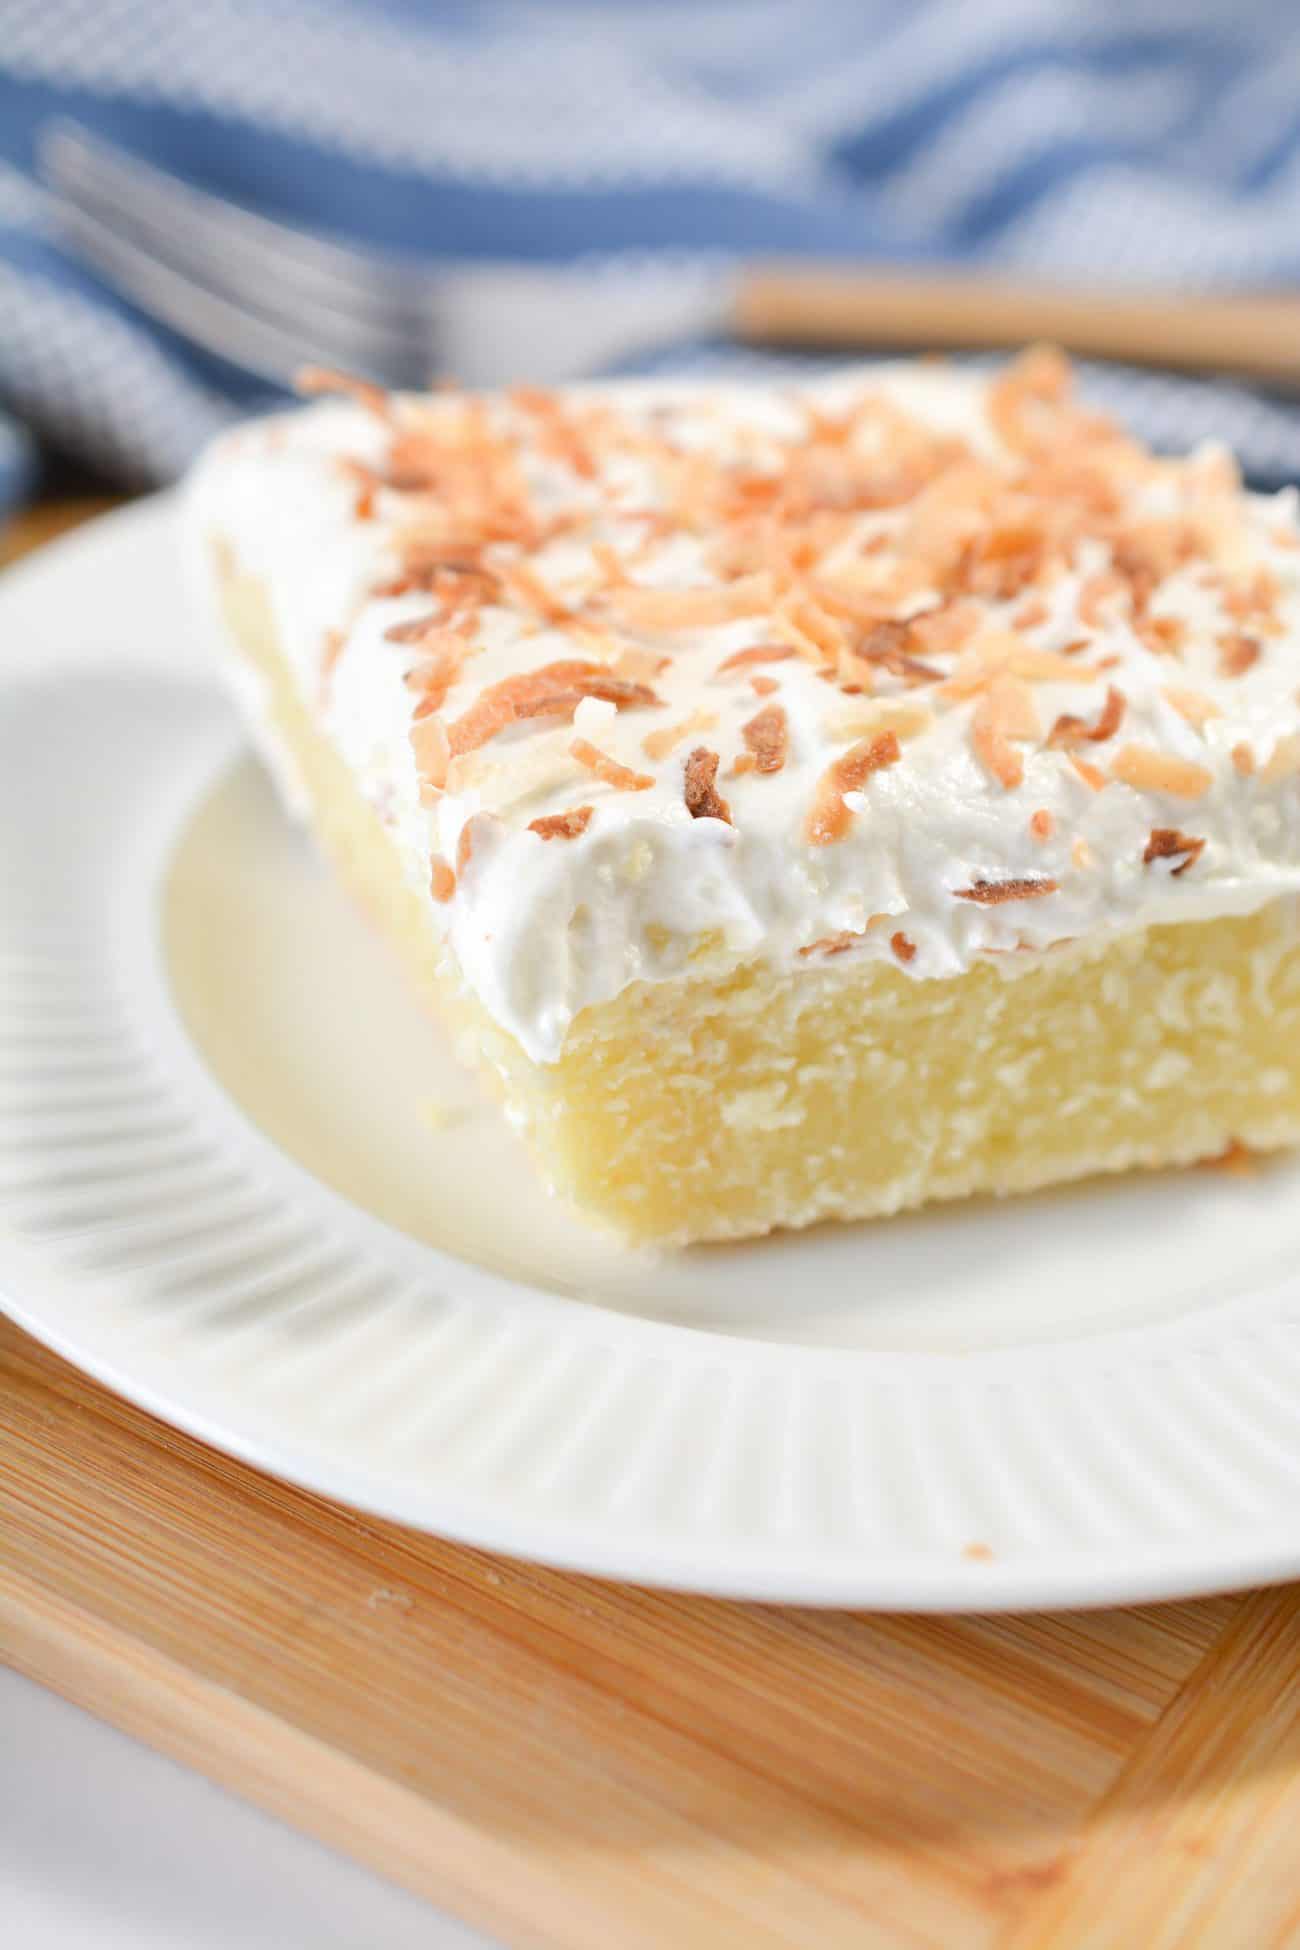 Coconut Topped Cream Cheese Sheet Cake